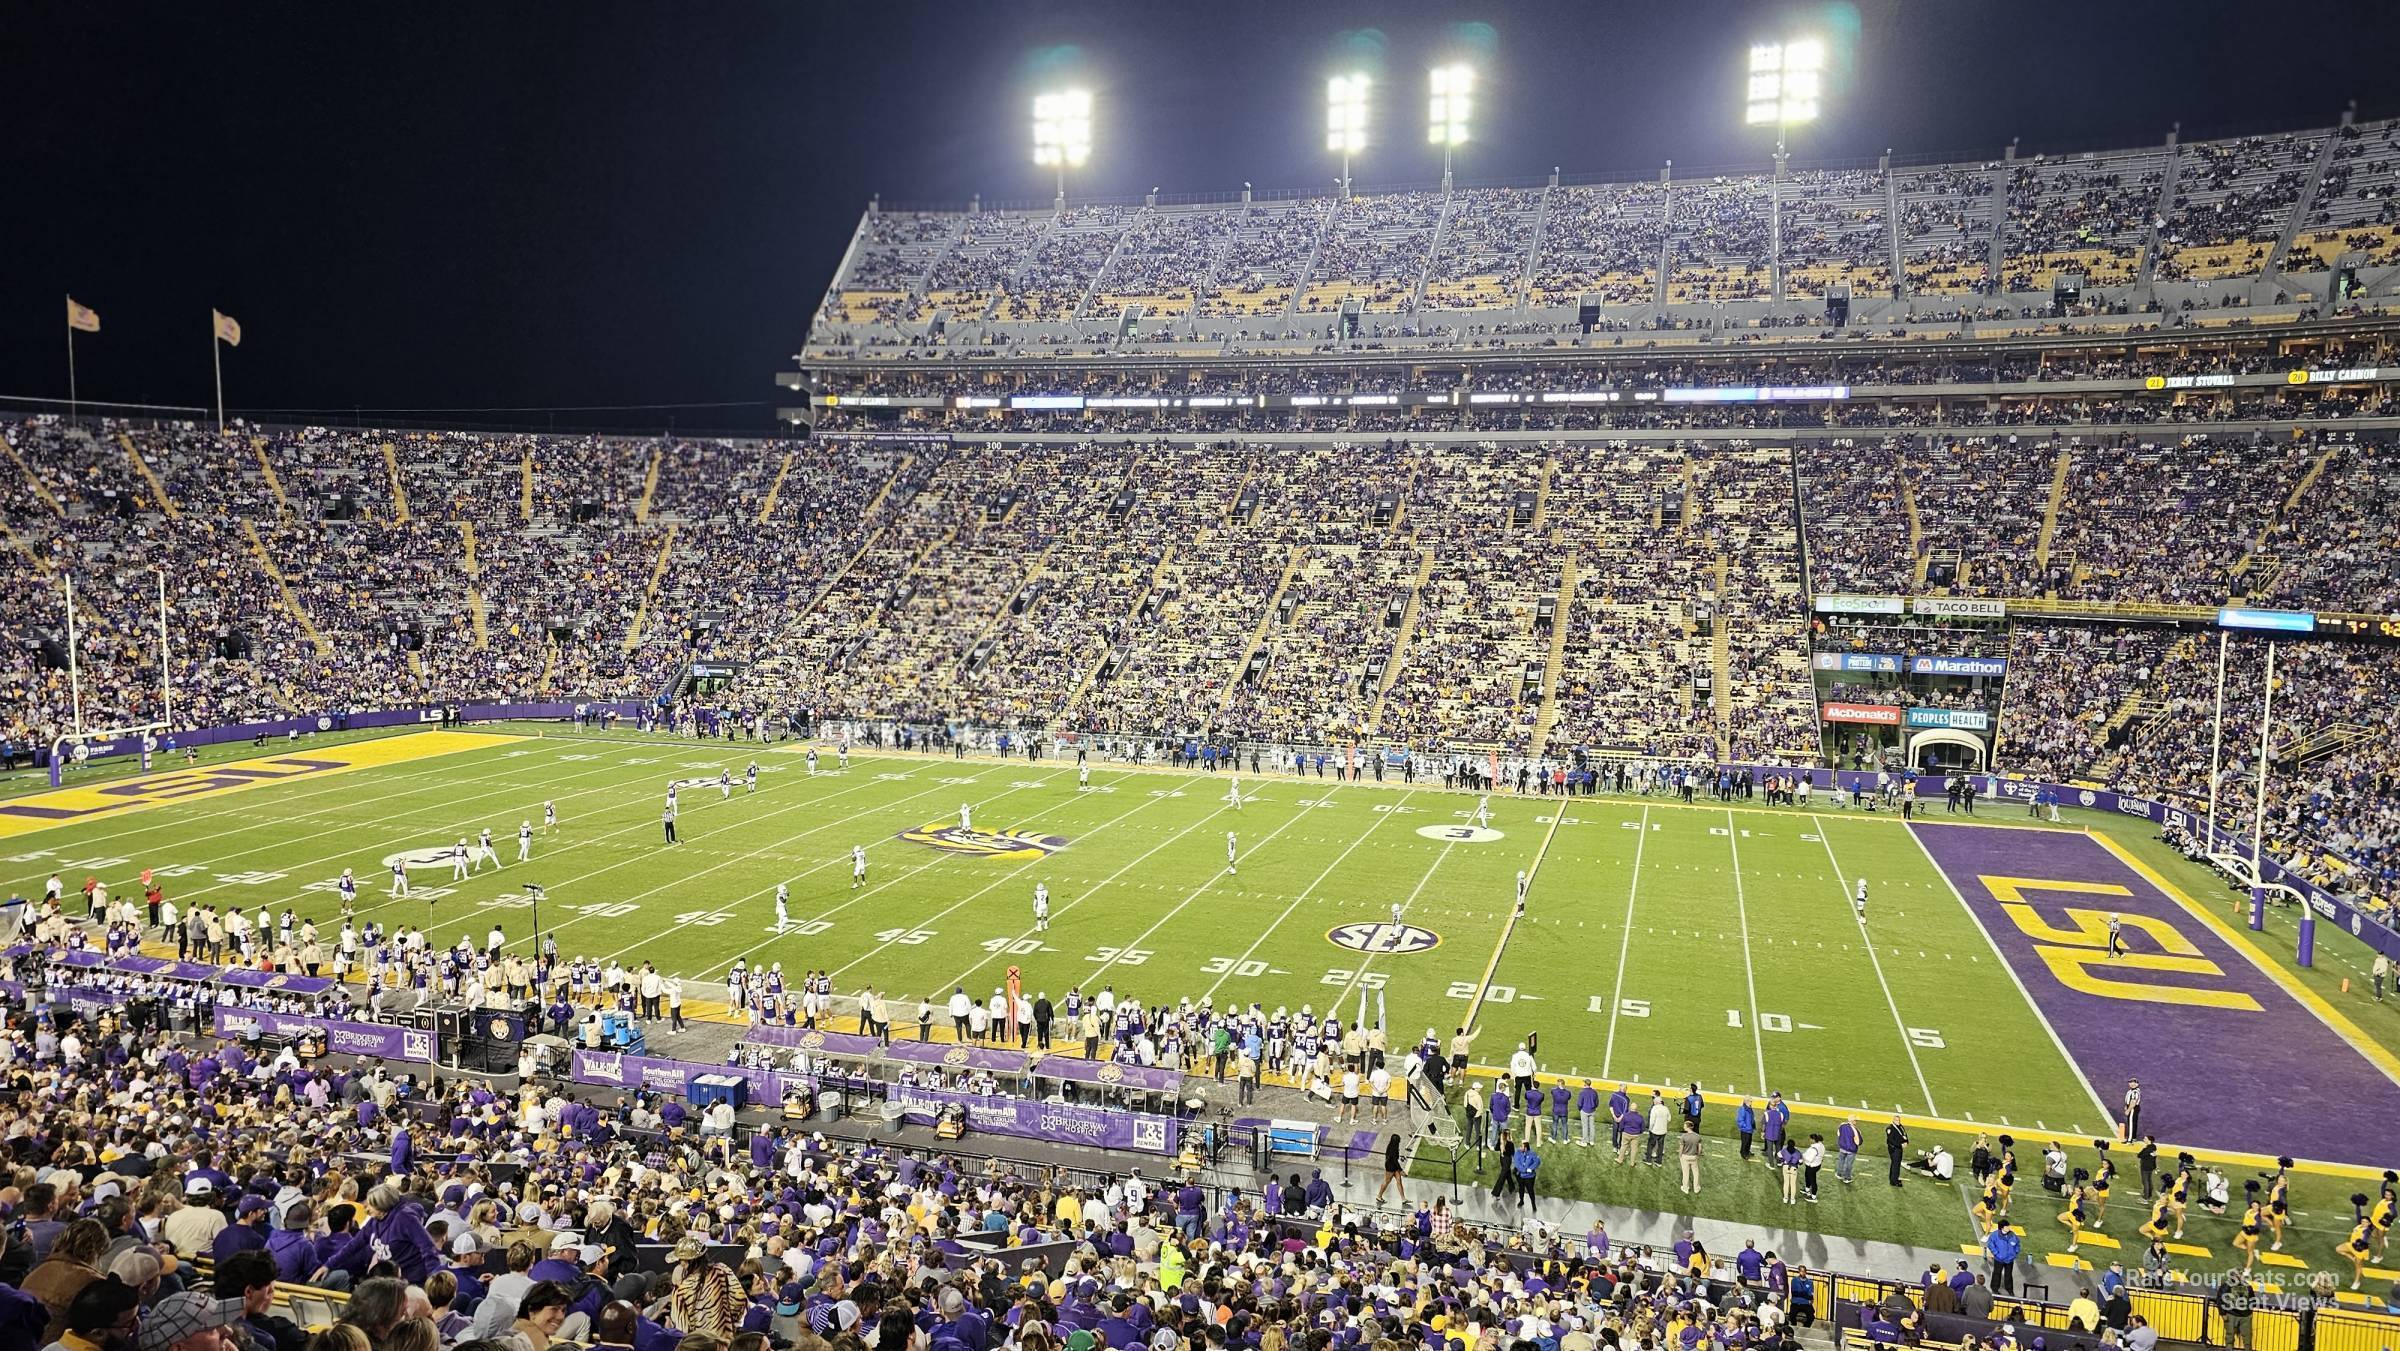 section 100, row 48 seat view  - tiger stadium